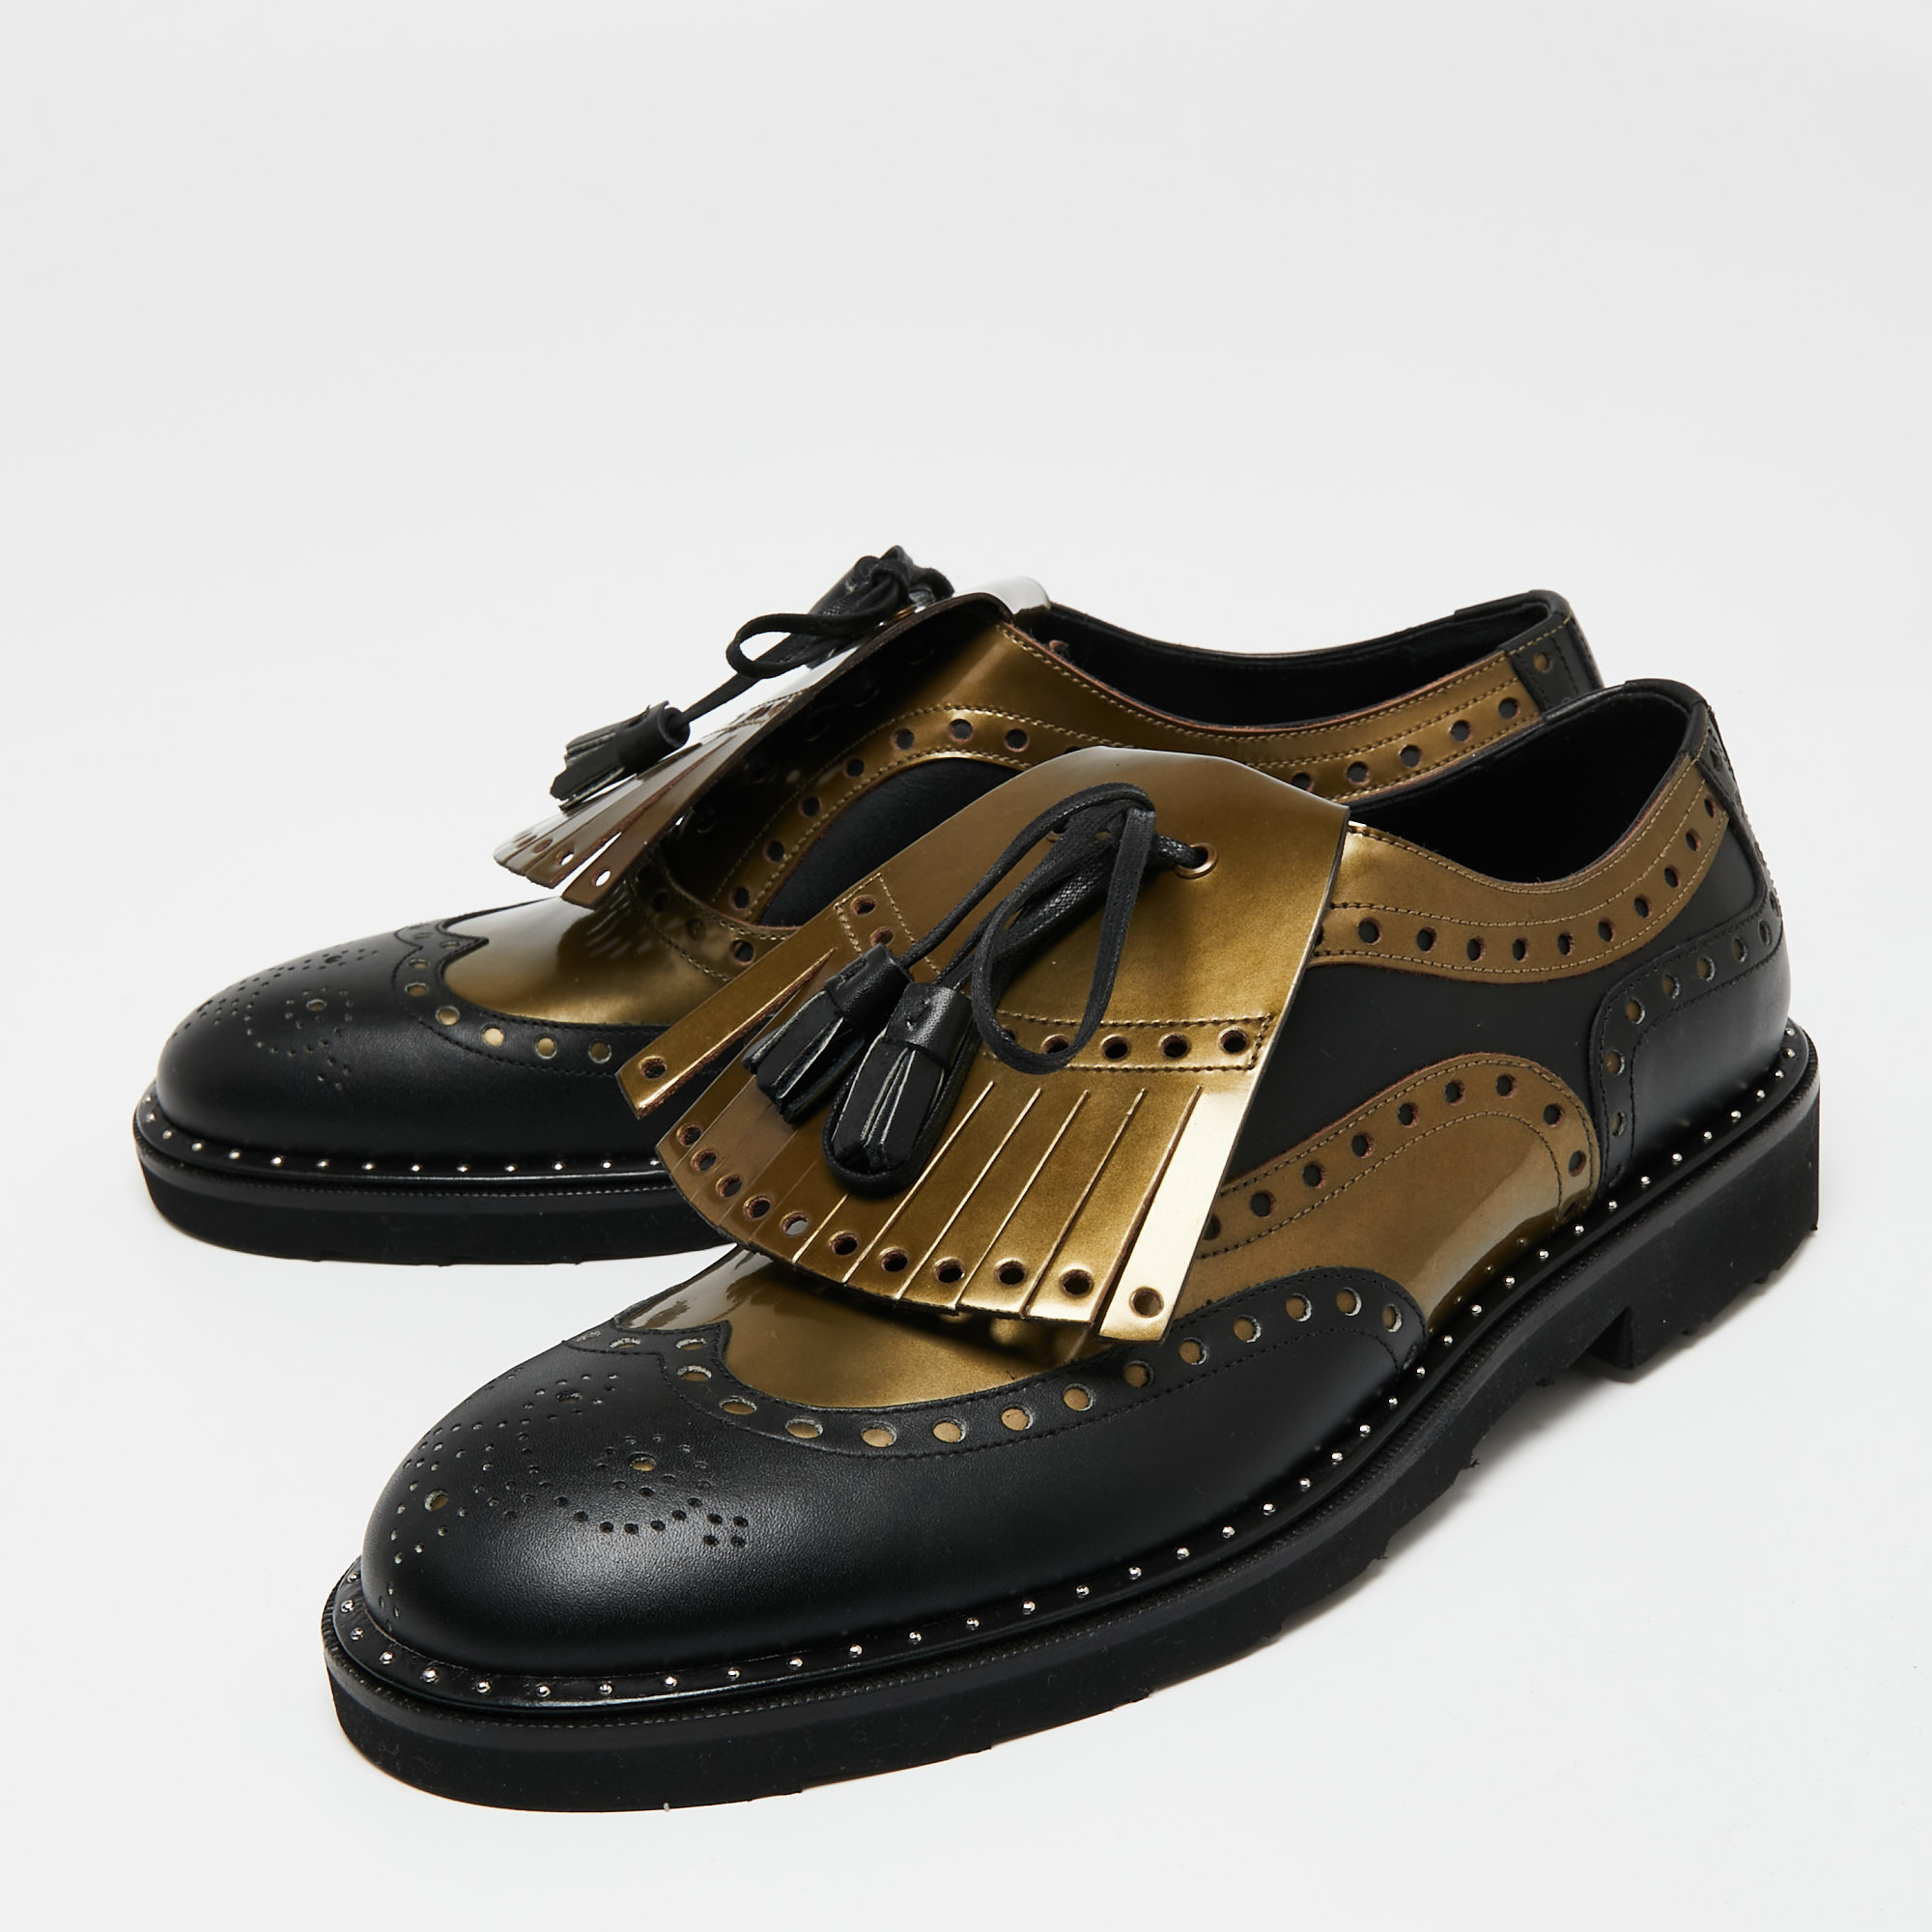 

Dolce & Gabbana Black/Olive Green Brogue Leather and Patent Fringe Detail Oxfords Size